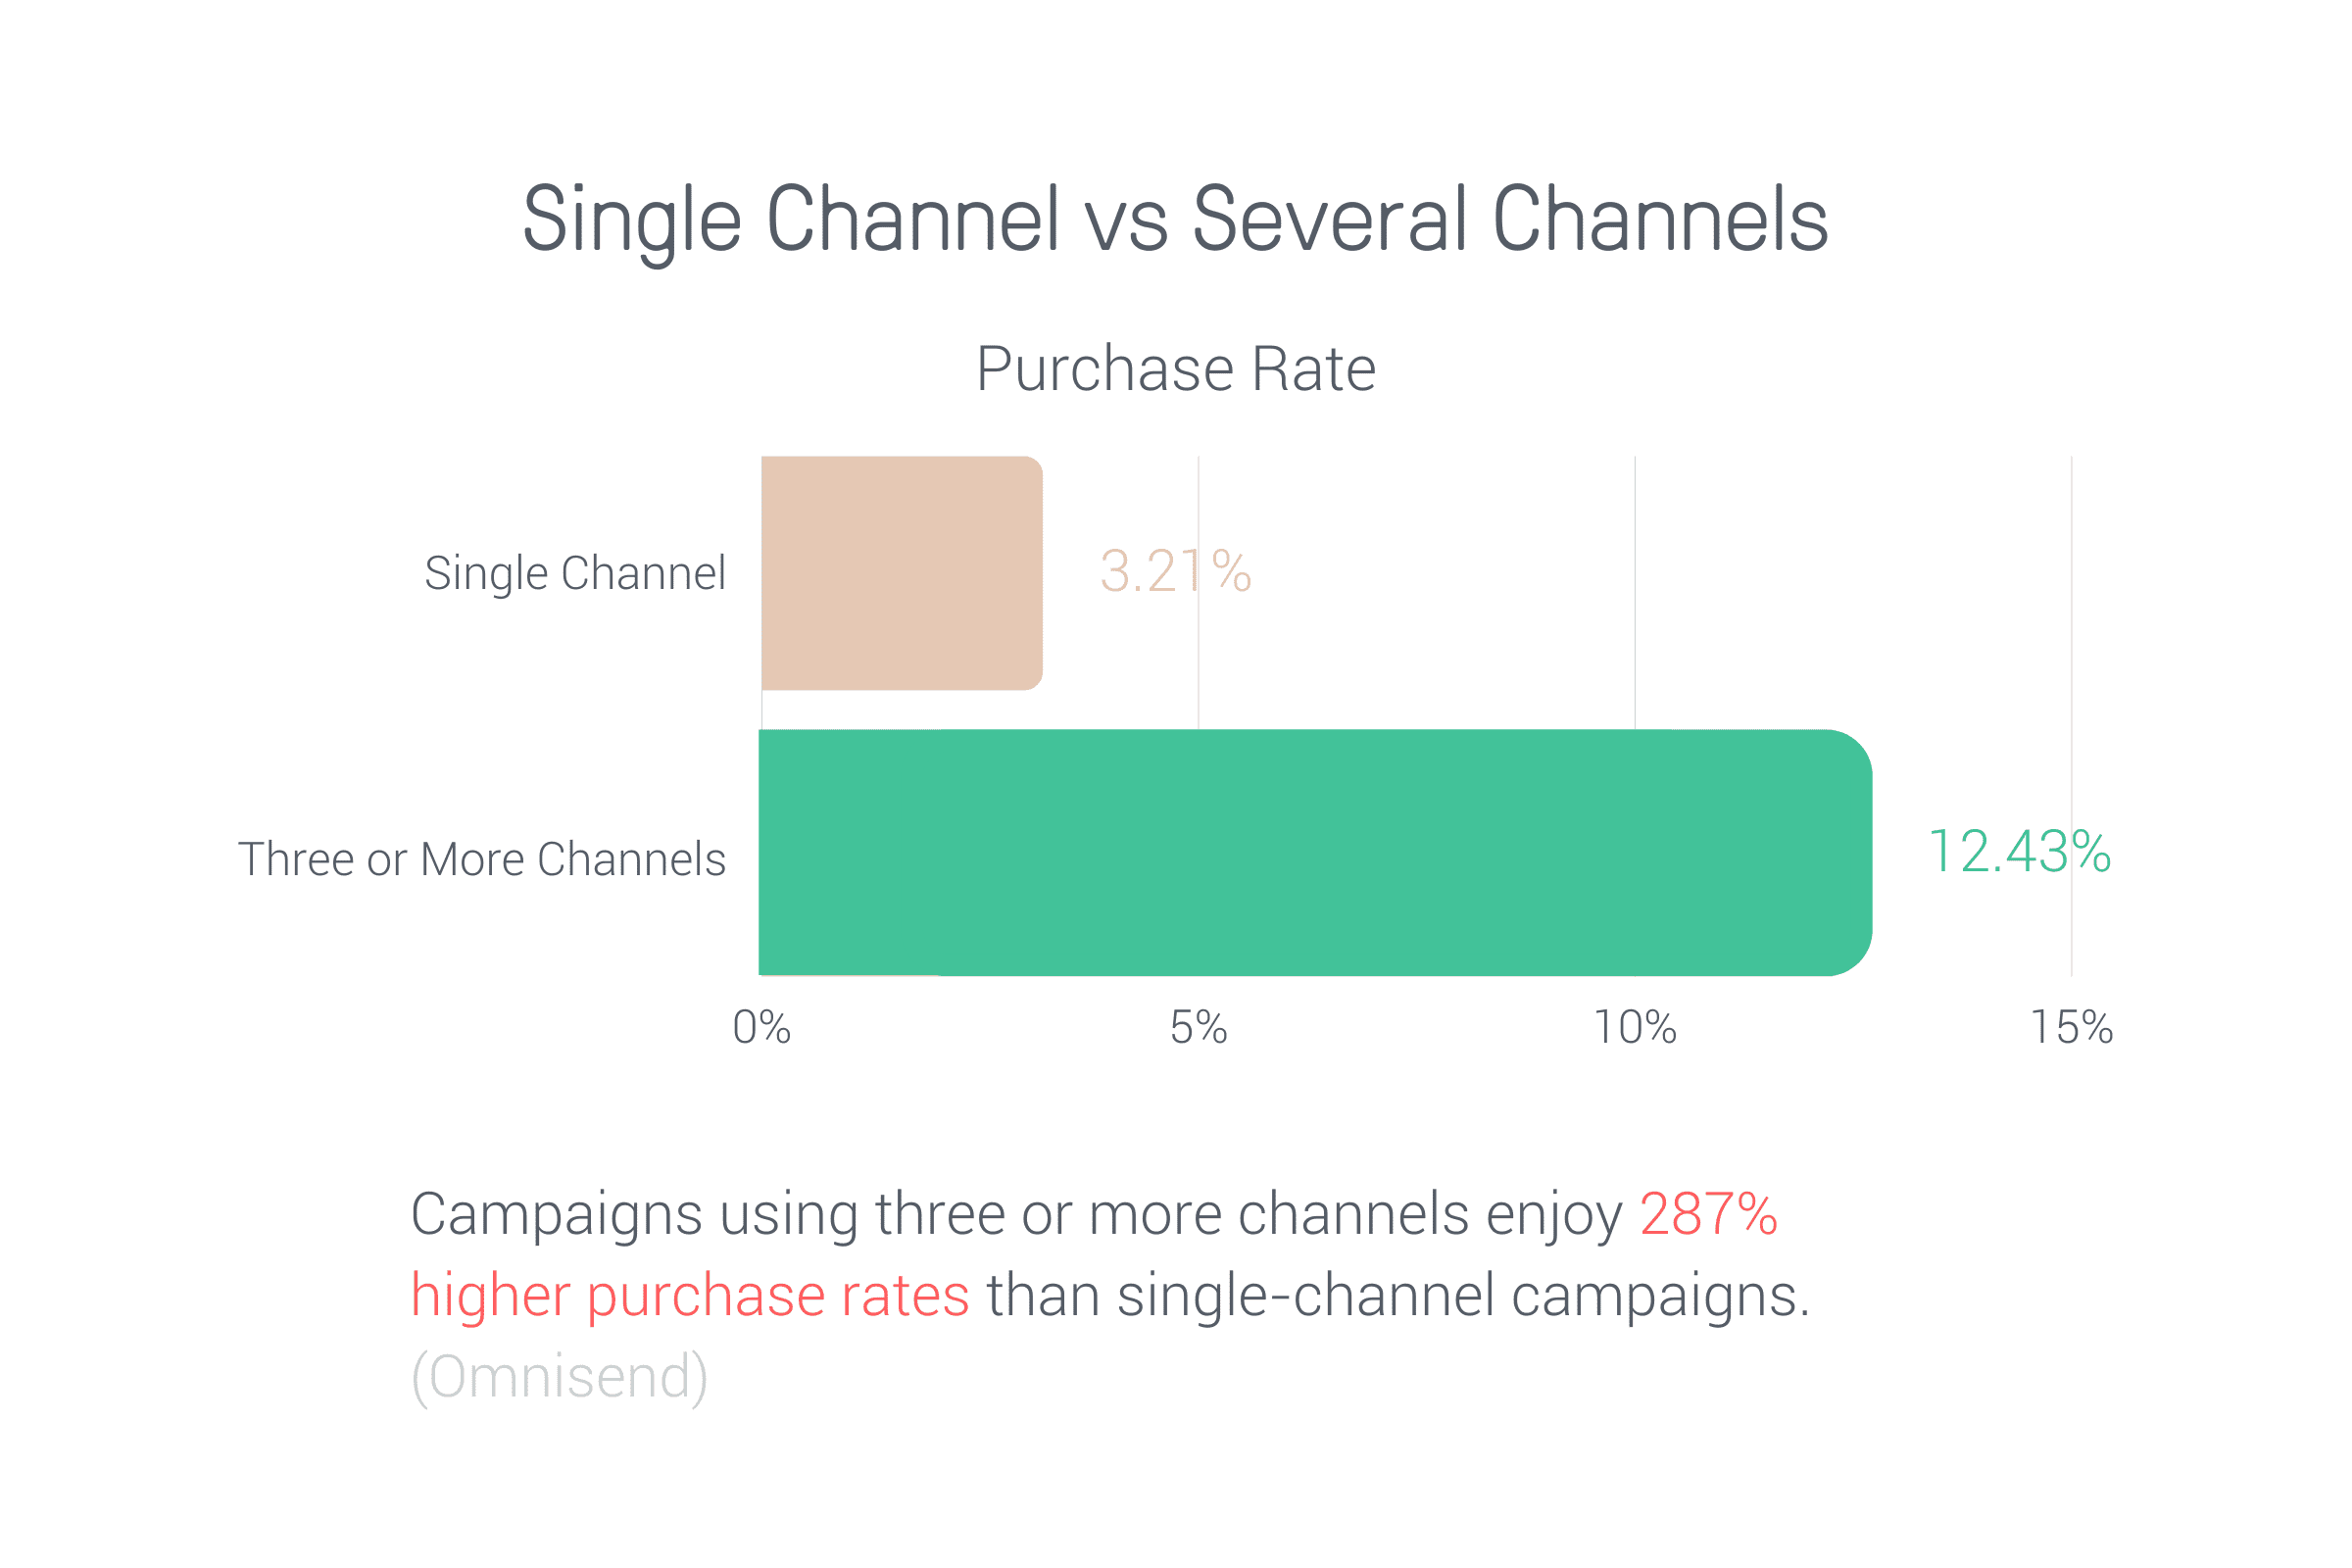 bar graph showing the difference between single channel and multiple channel purchase rates for ecommerce.